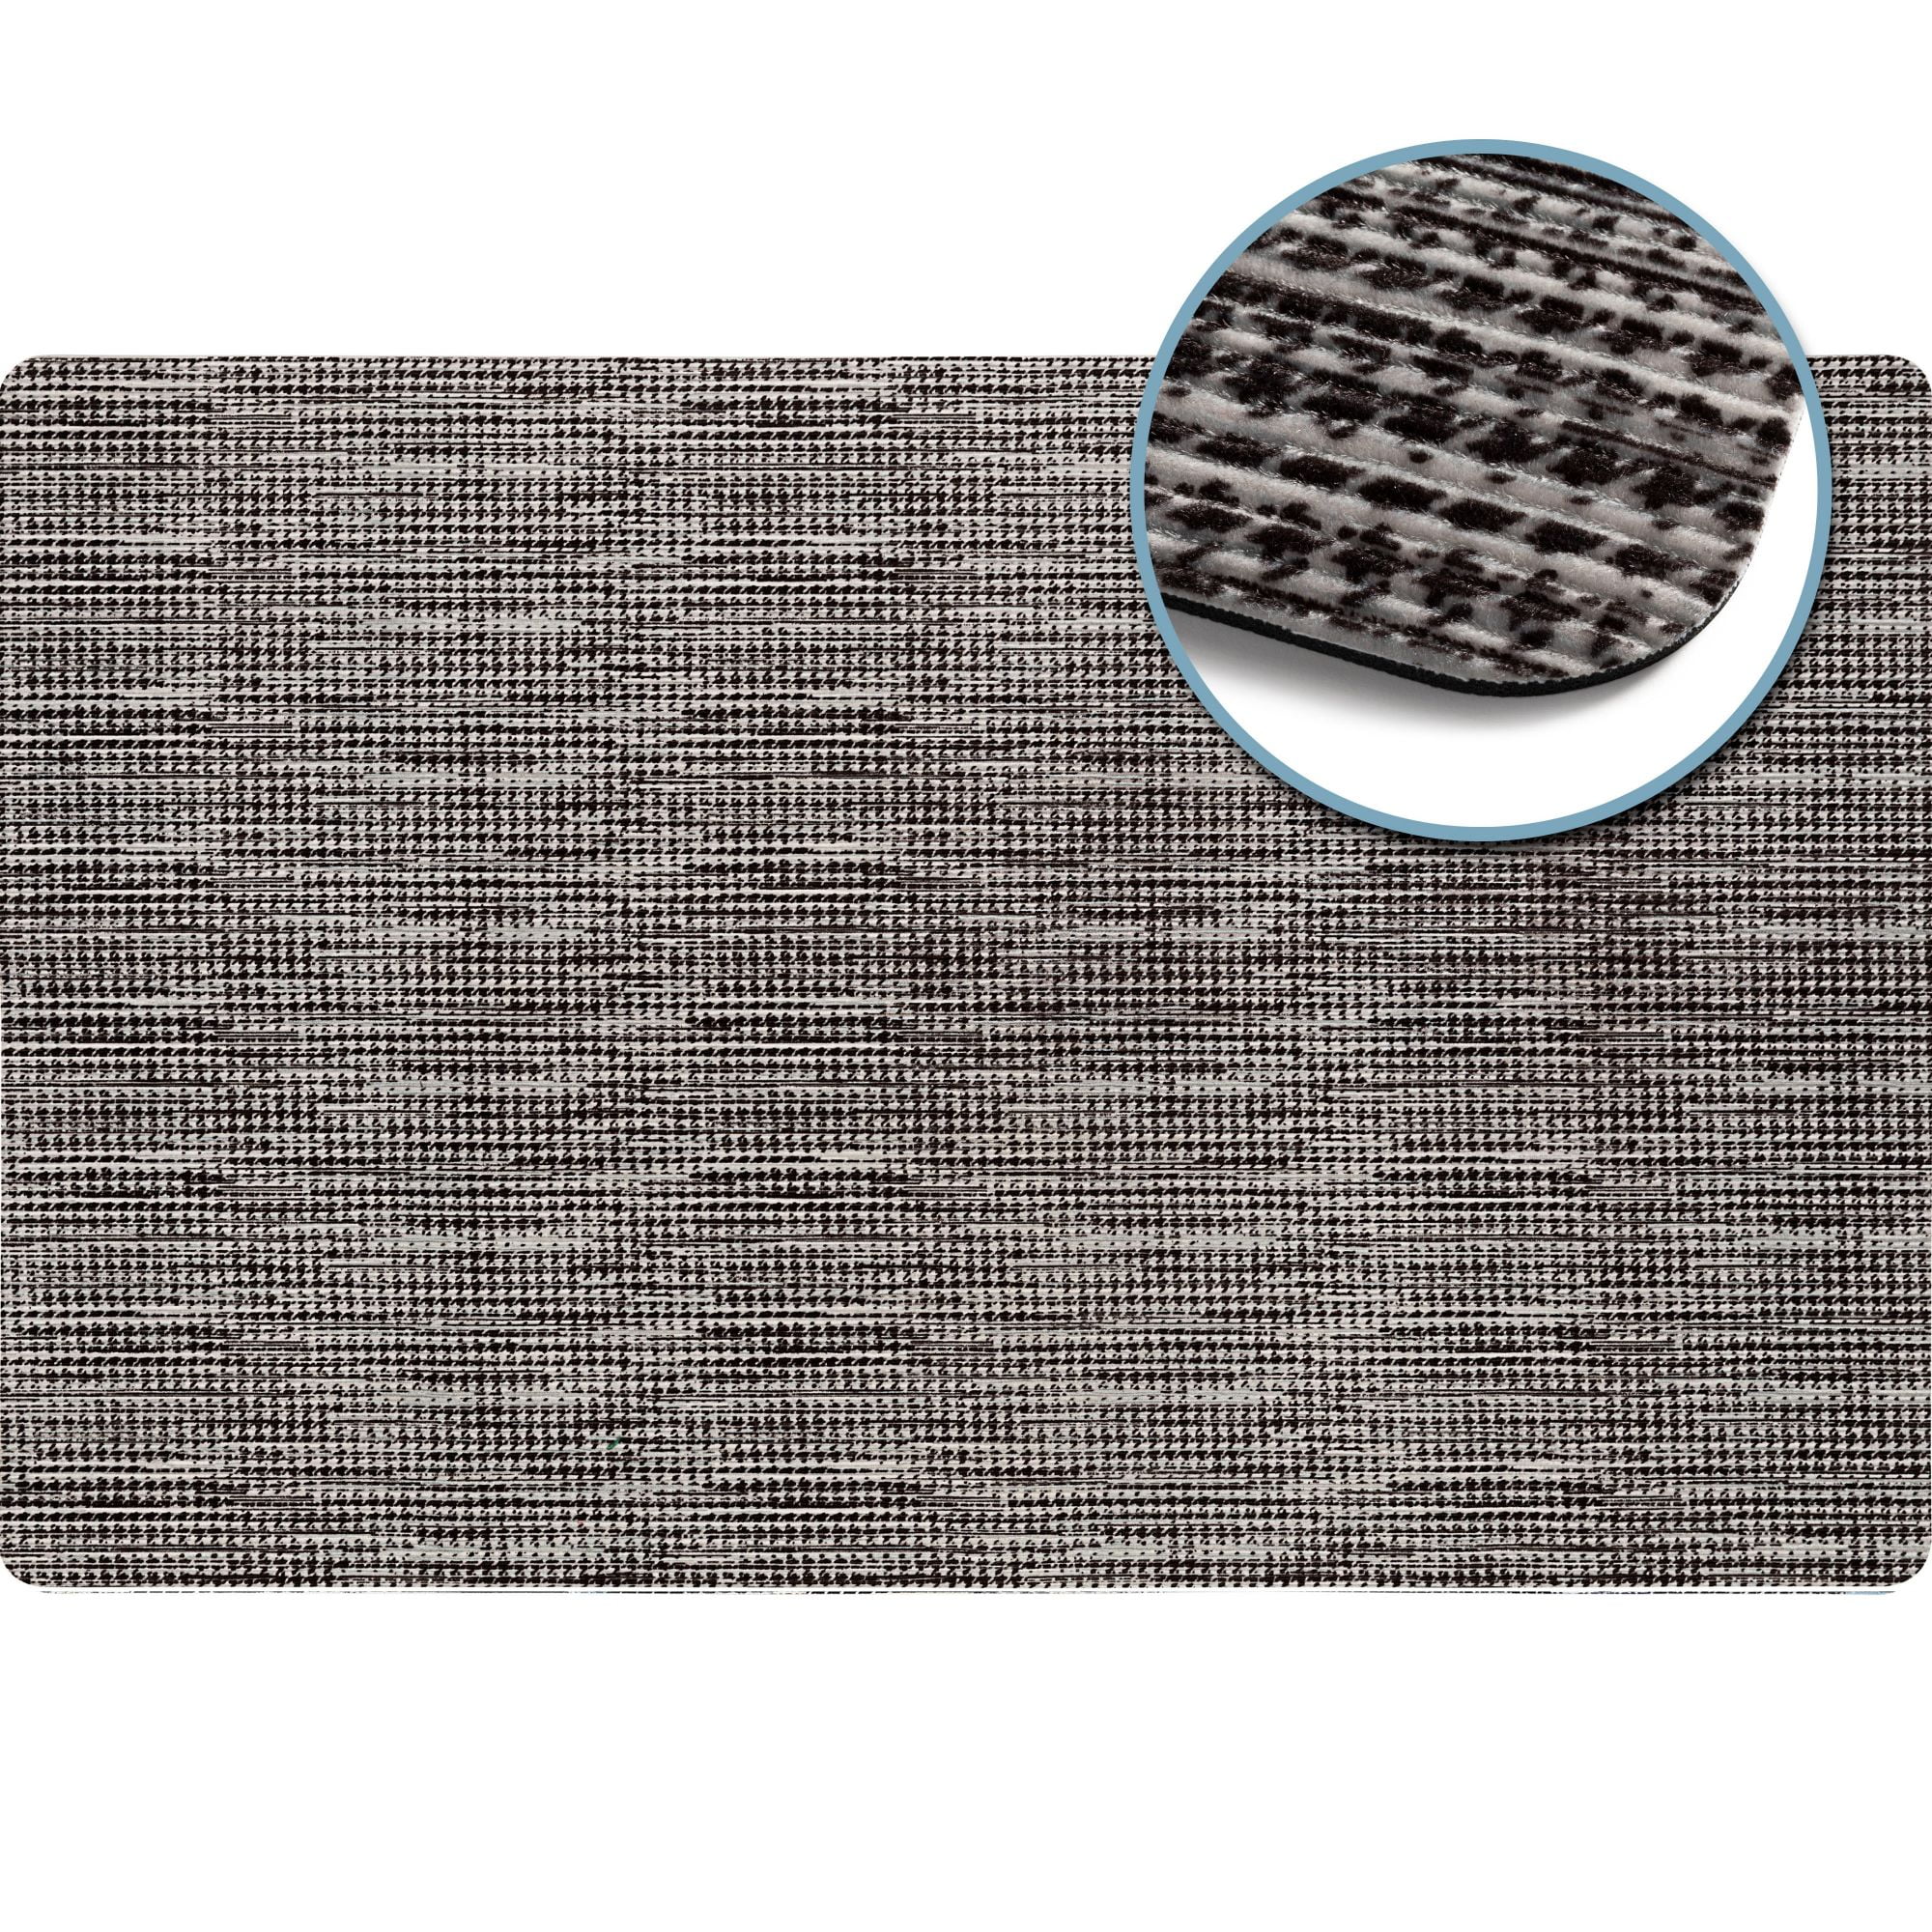 Sohome Smooth Step Houndstooth Machine Washable Low Profile Stain Resistant Non-Slip Versatile Utility Kitchen Mat, Gold/Grey, 24x35